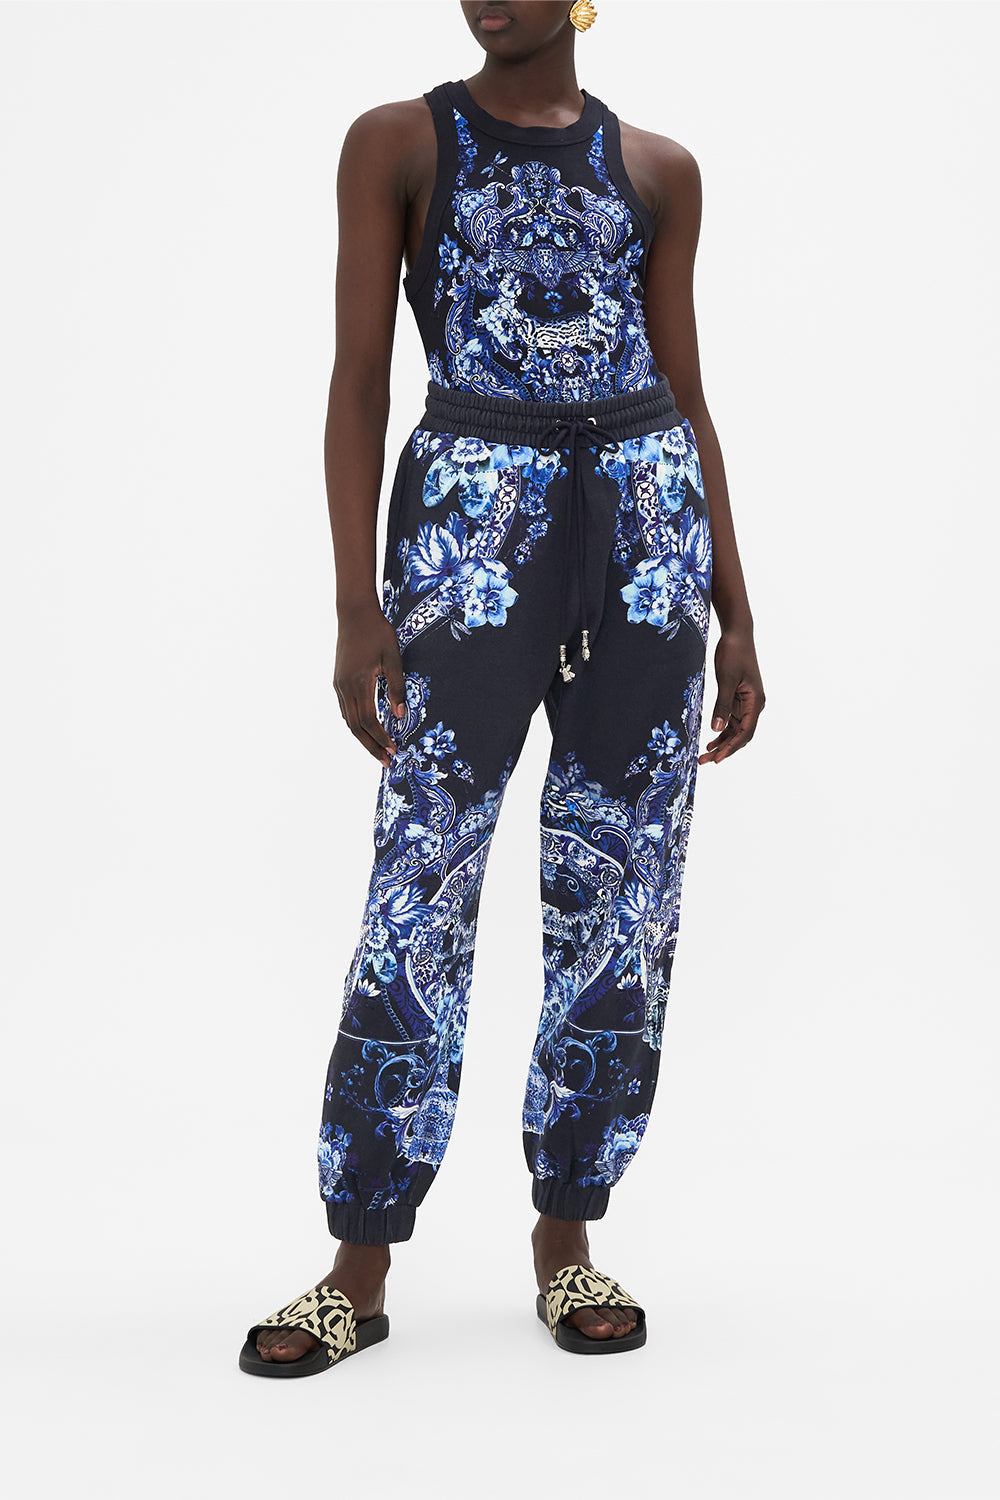 Front view of model wearing CAMILLA designer track pants in Delft Dynasty print 